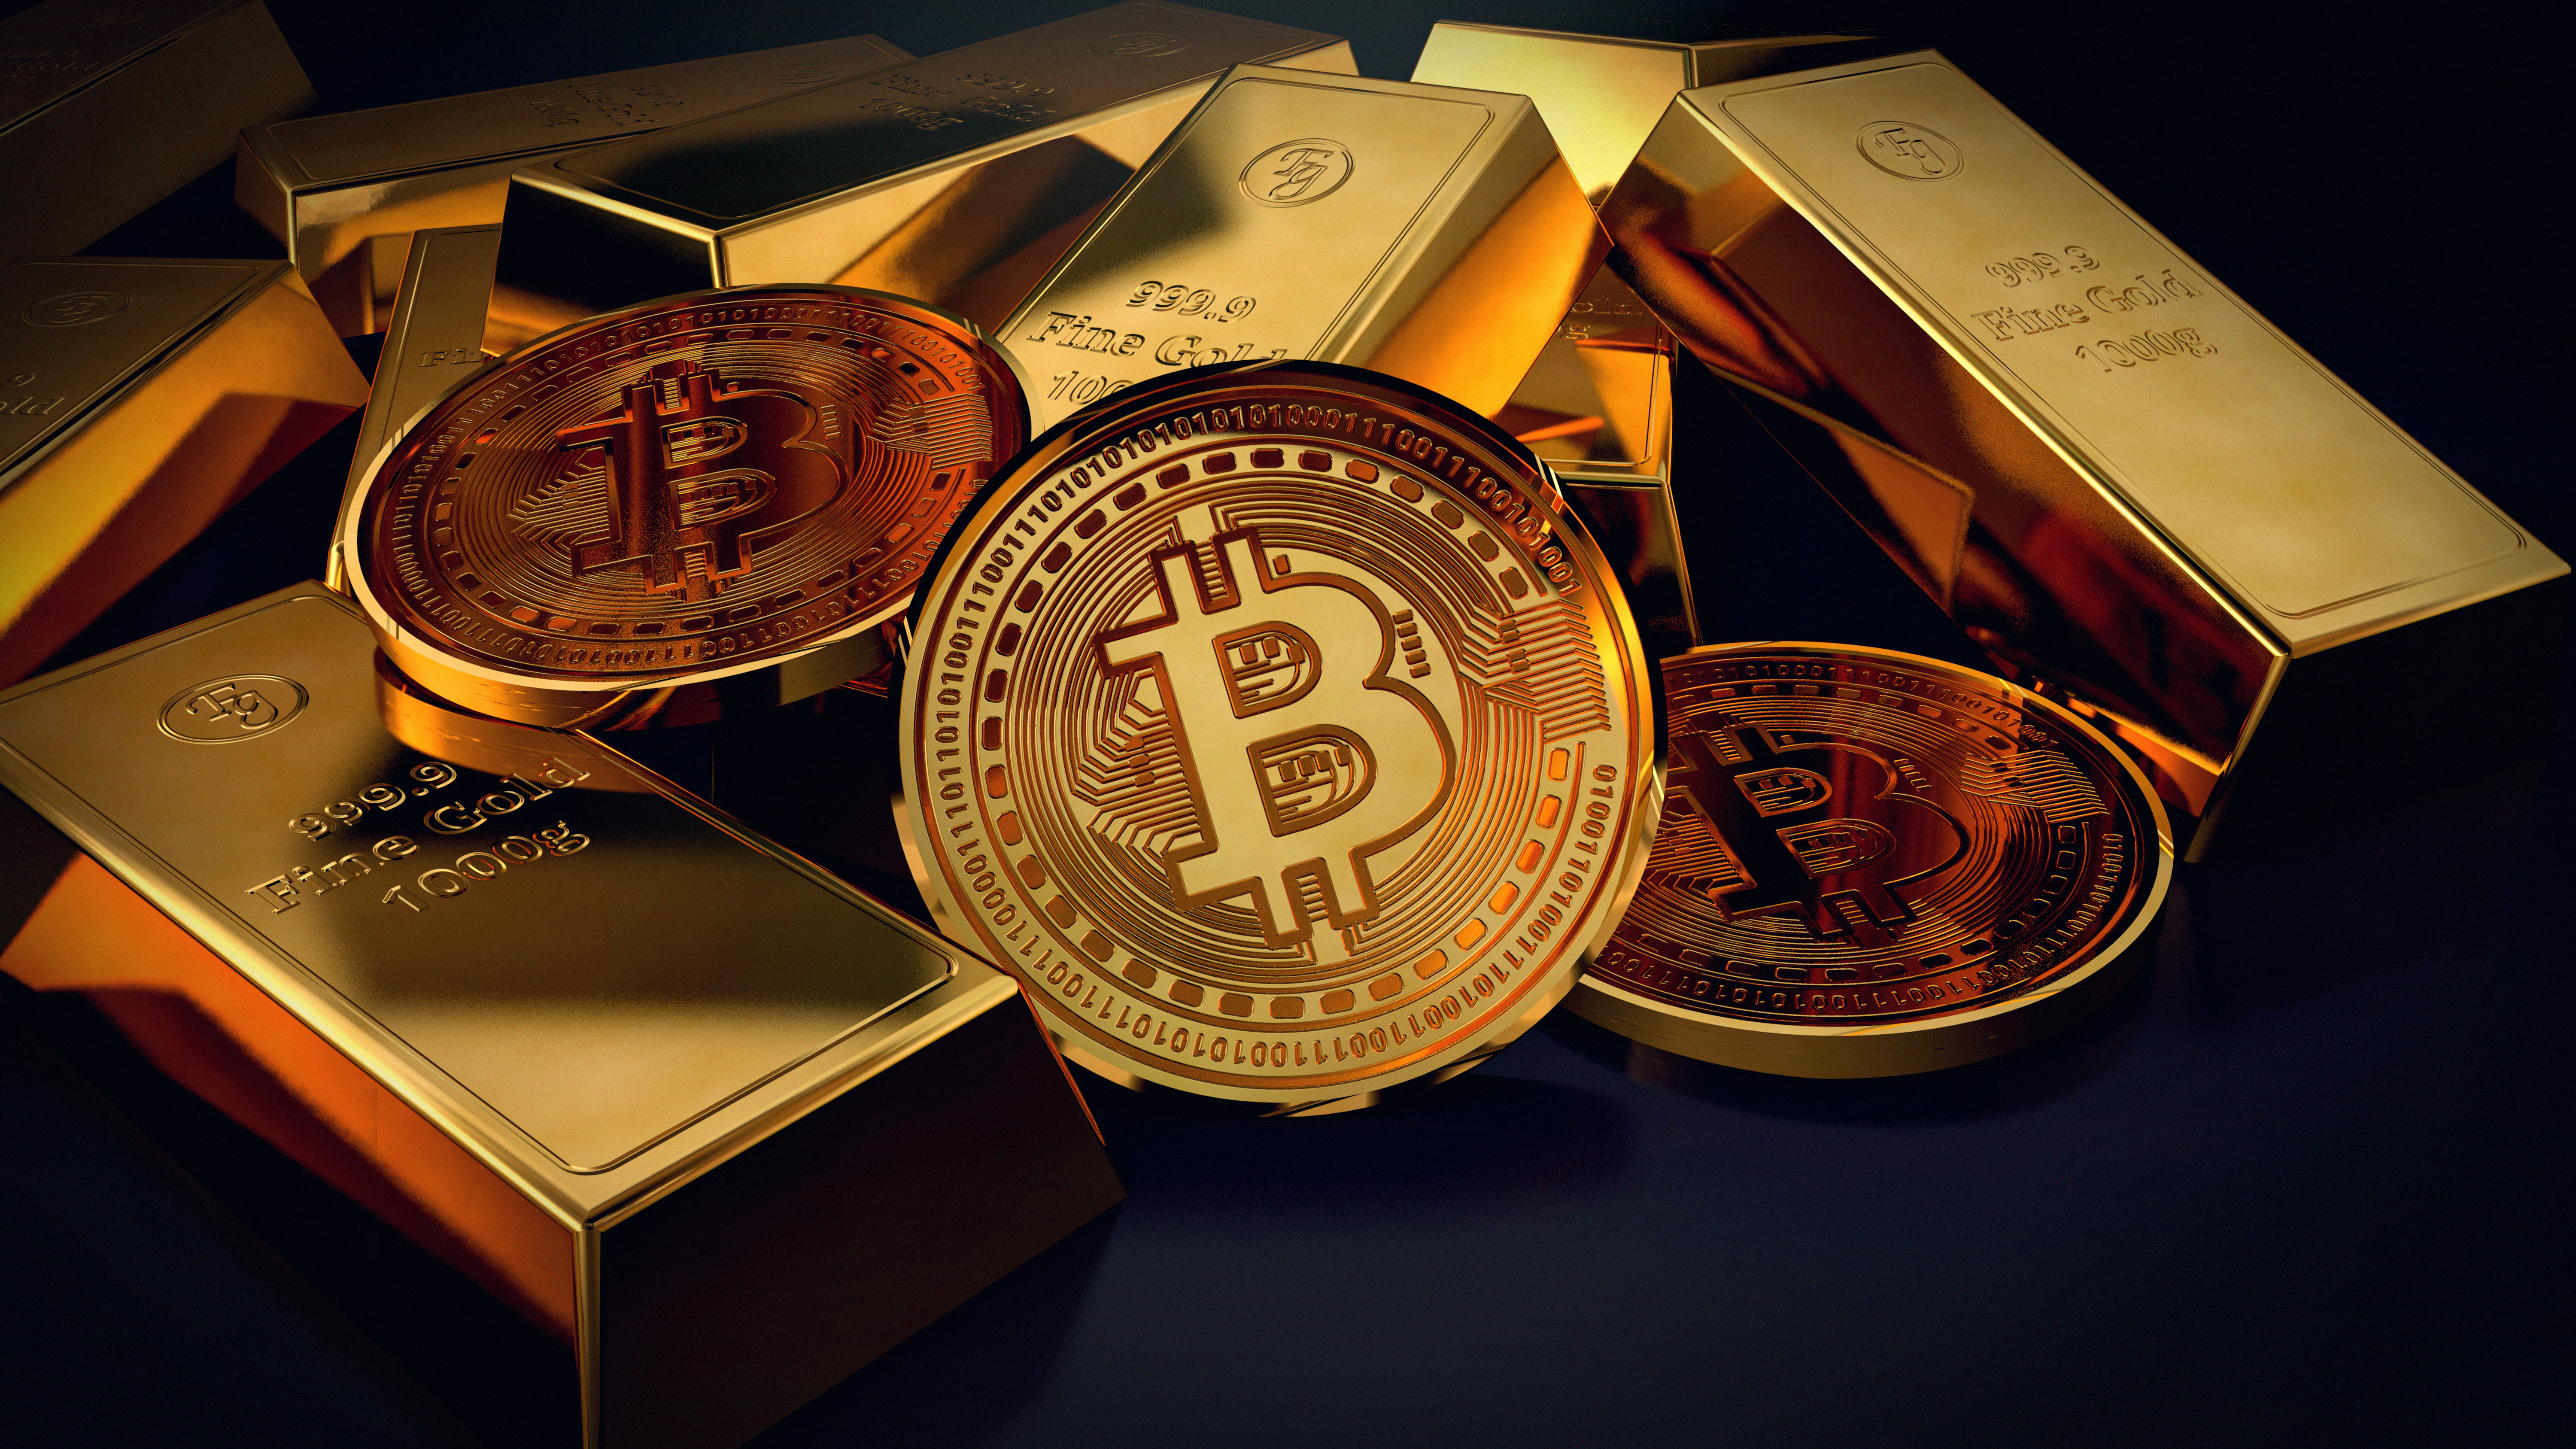 Several coins, representing Bitcoin tokens, in a pile, mixed with gold bars.